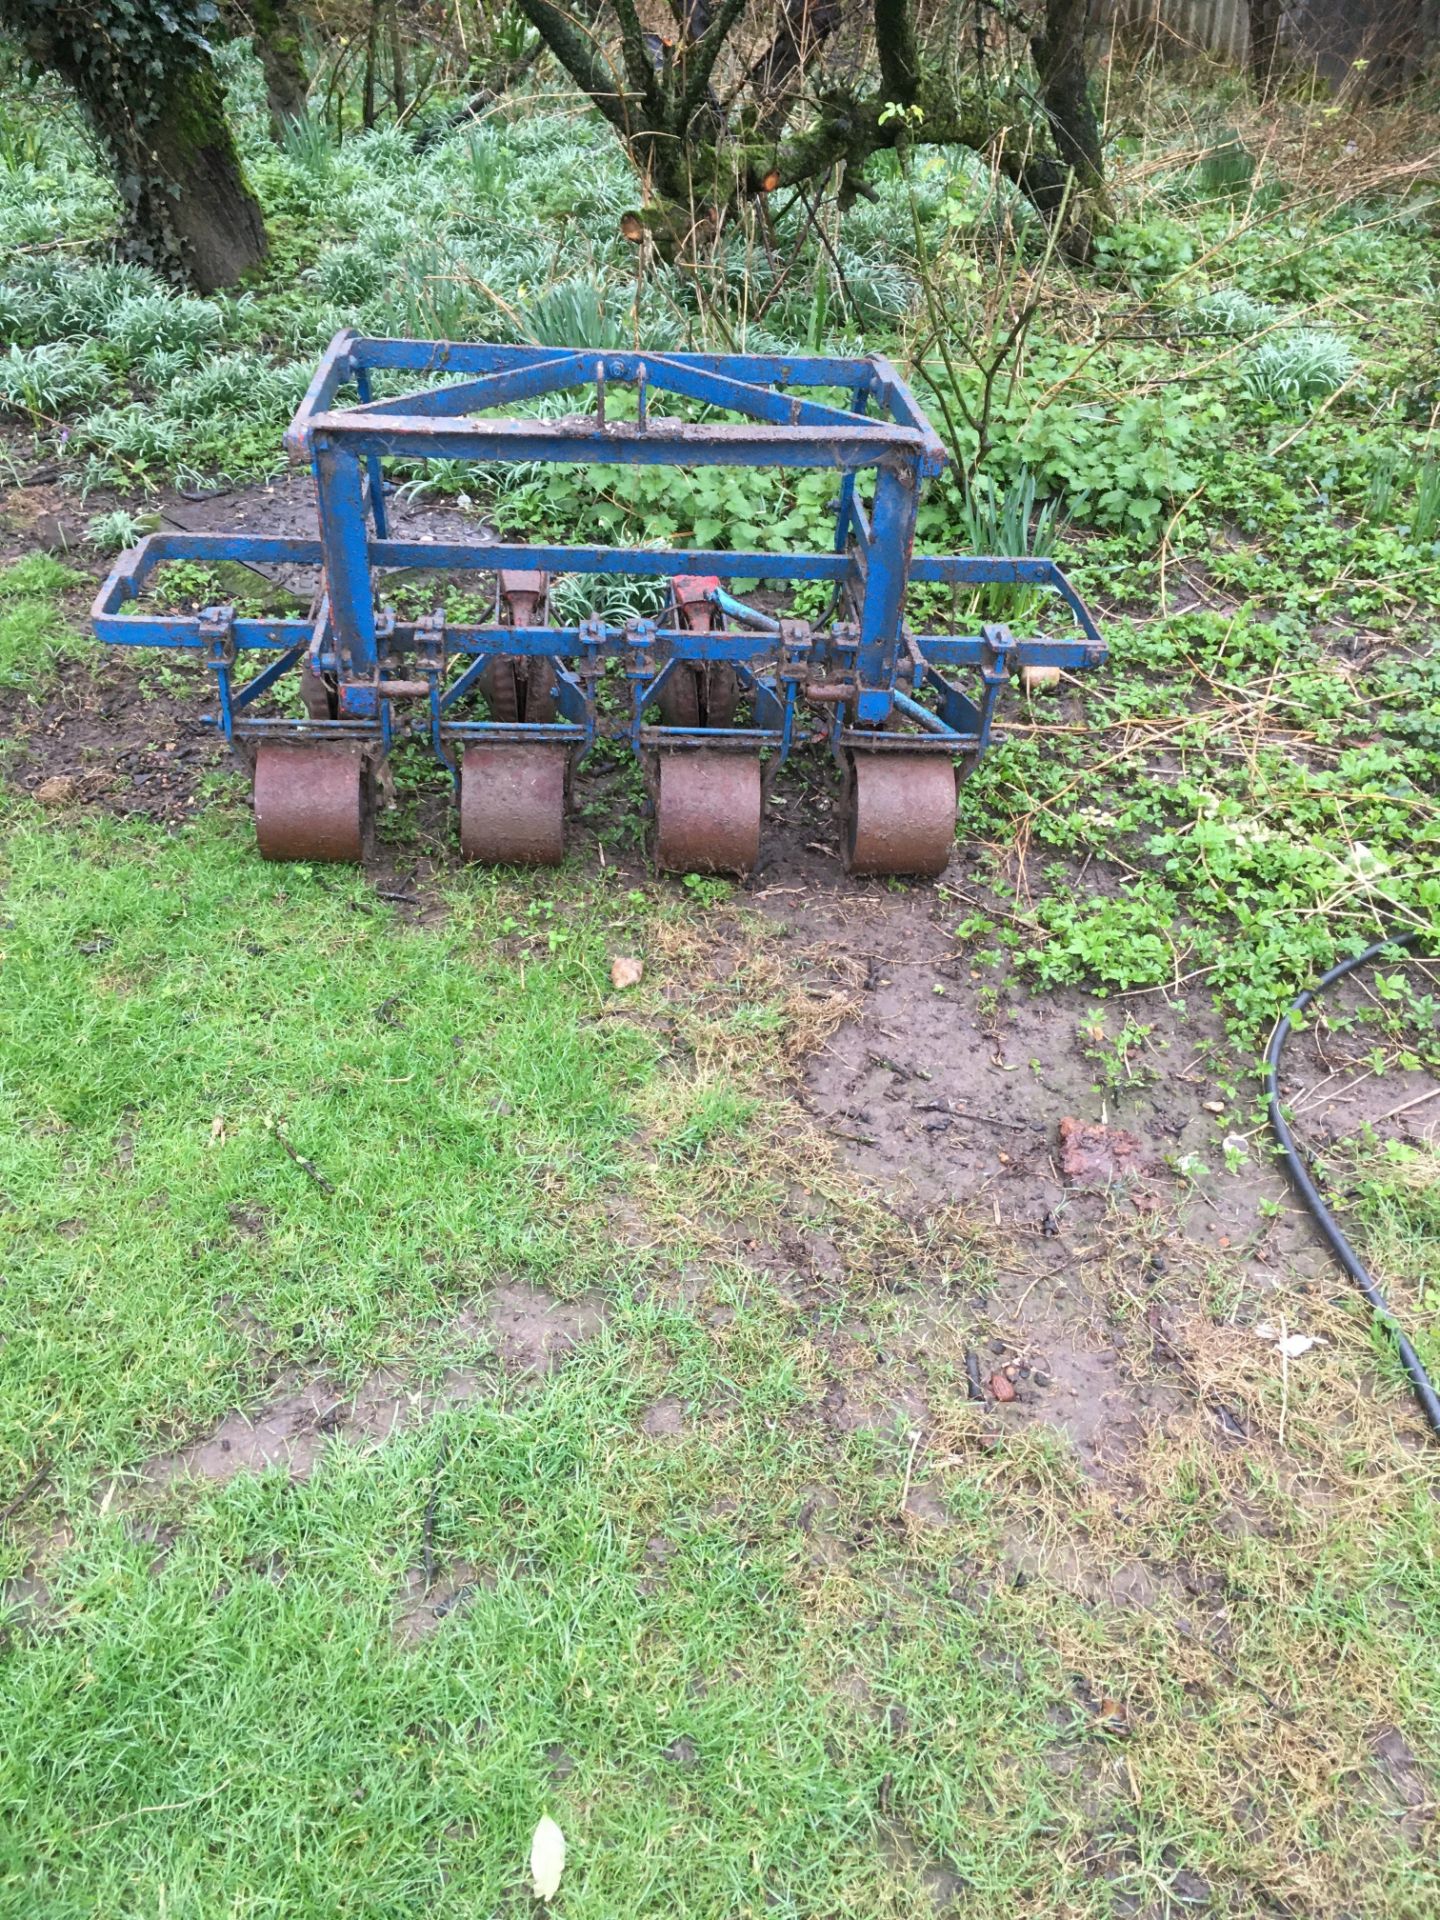 4 ROW SMALL SEED DRILL